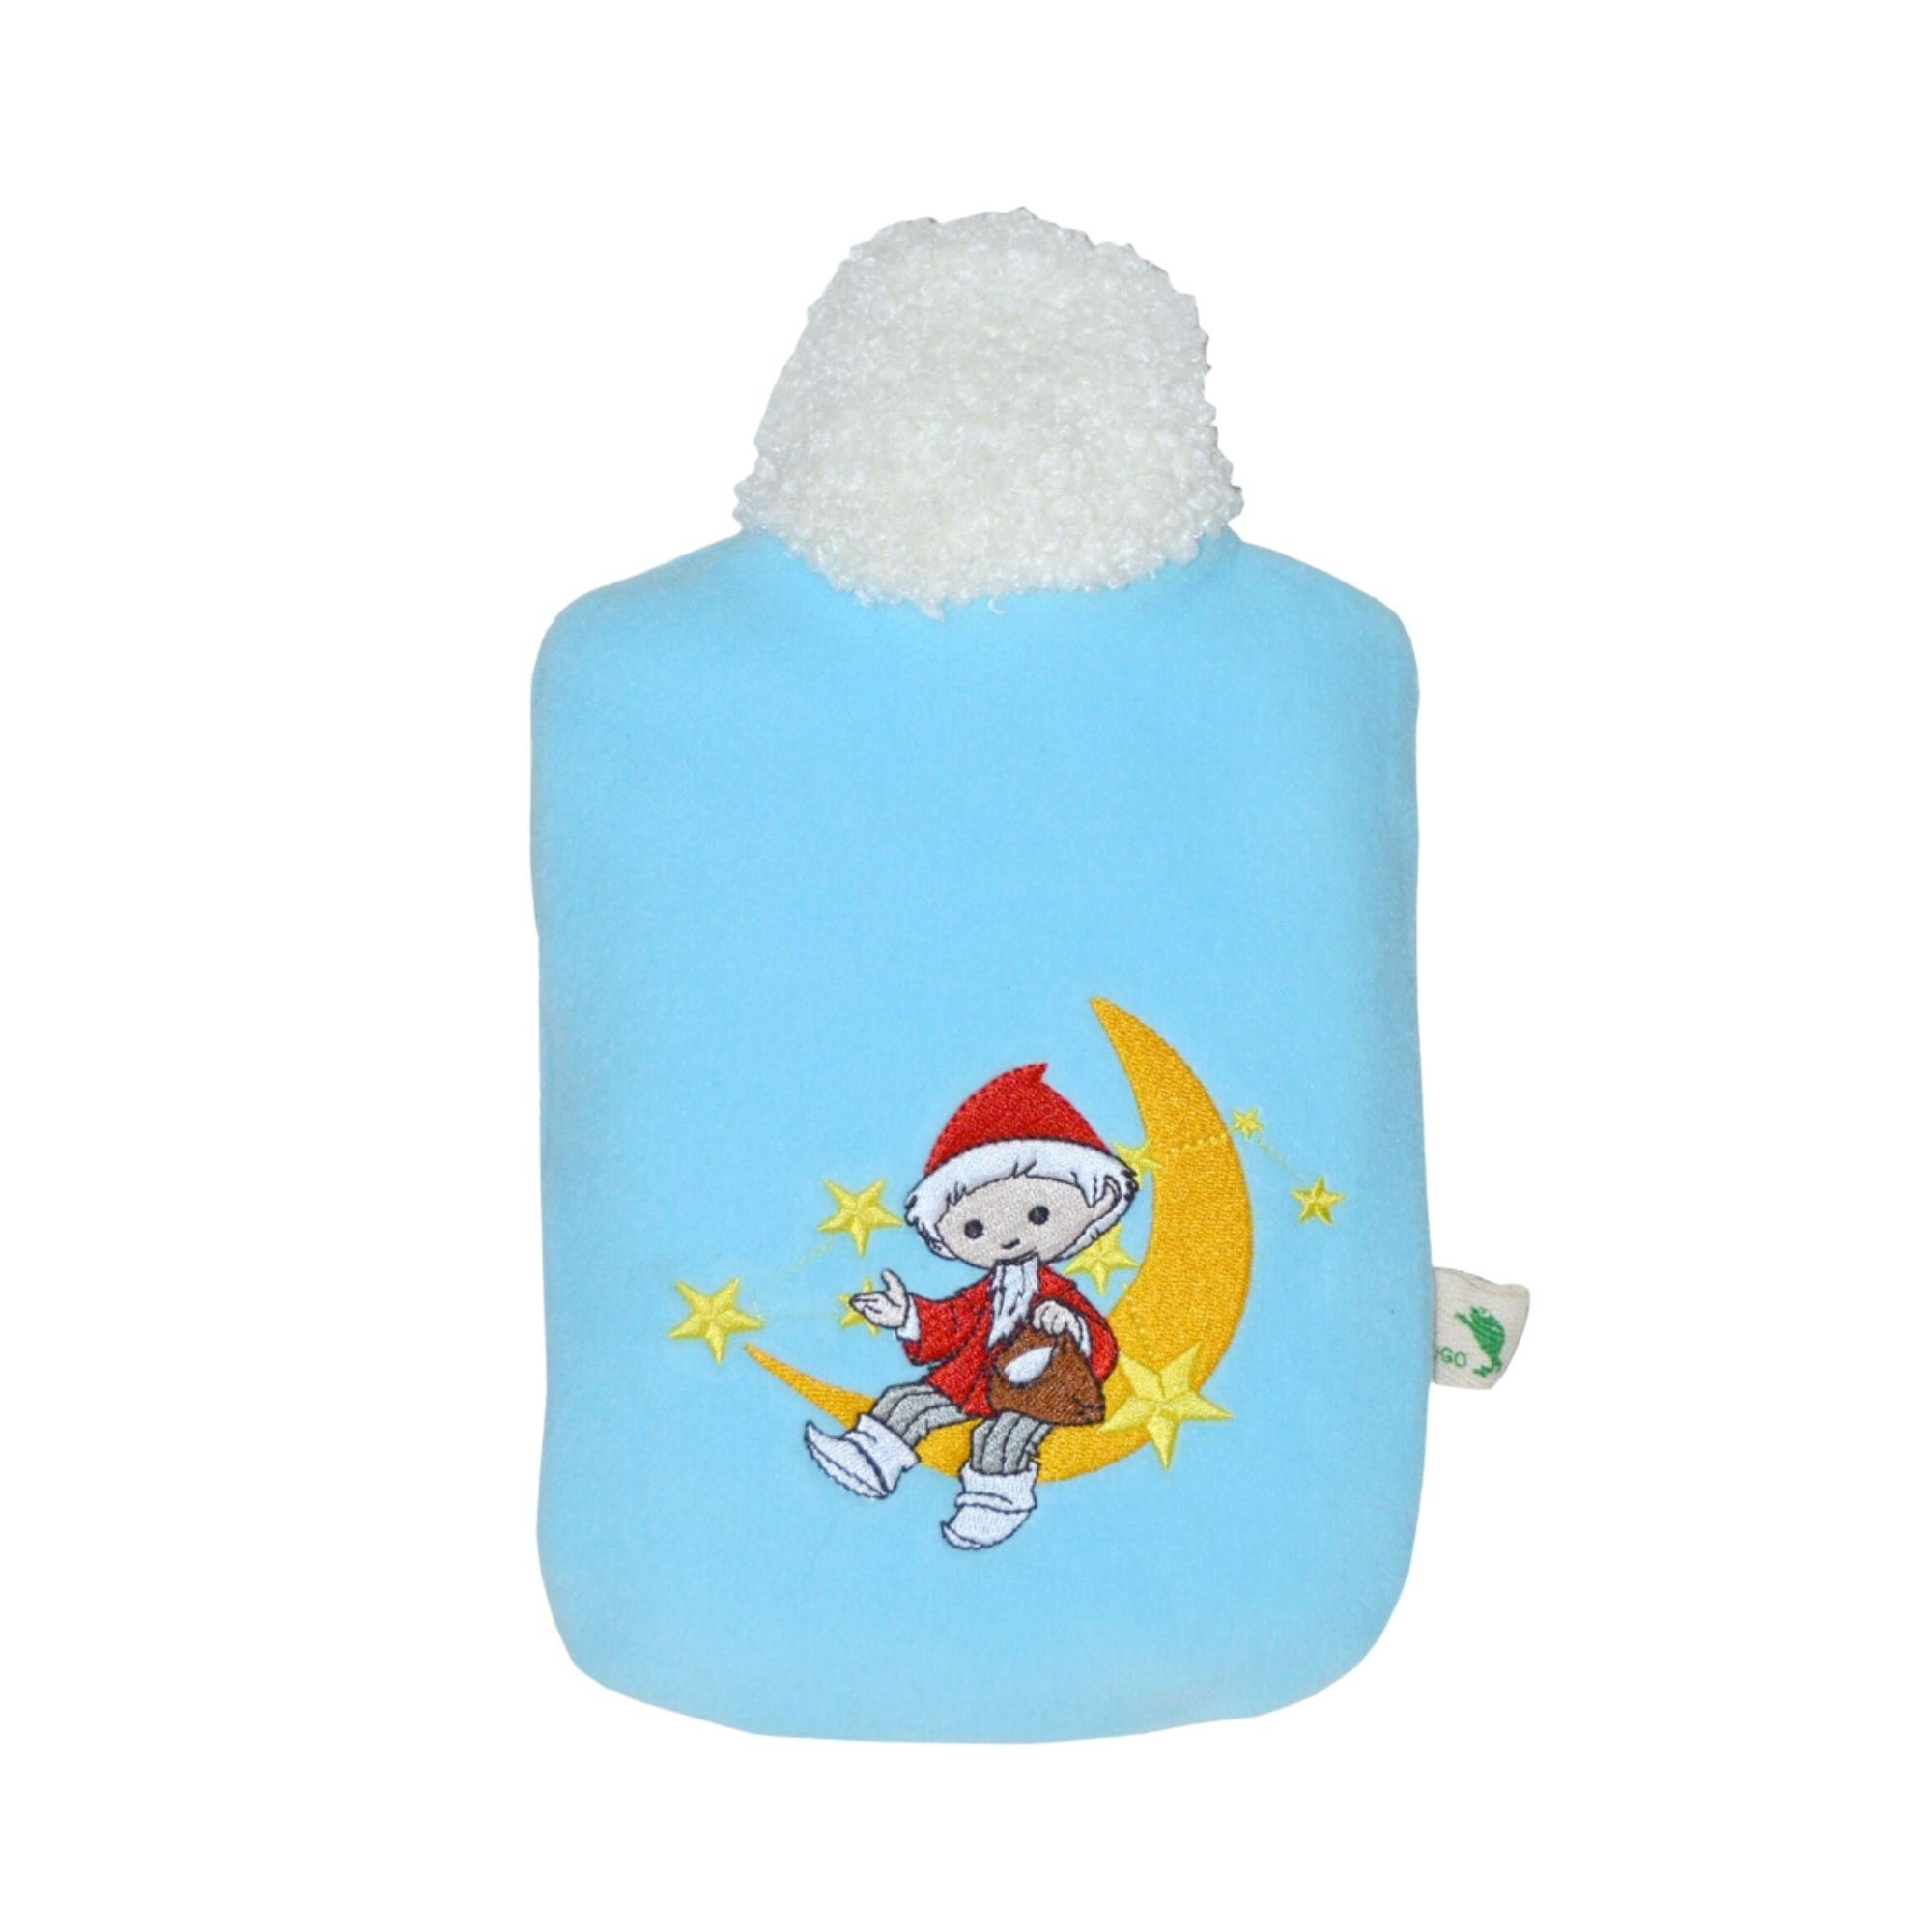 0.8 Litre Eco Hot Water Bottle with Sandman on the Moon Soft Fleece Blue Cover (rubberless)